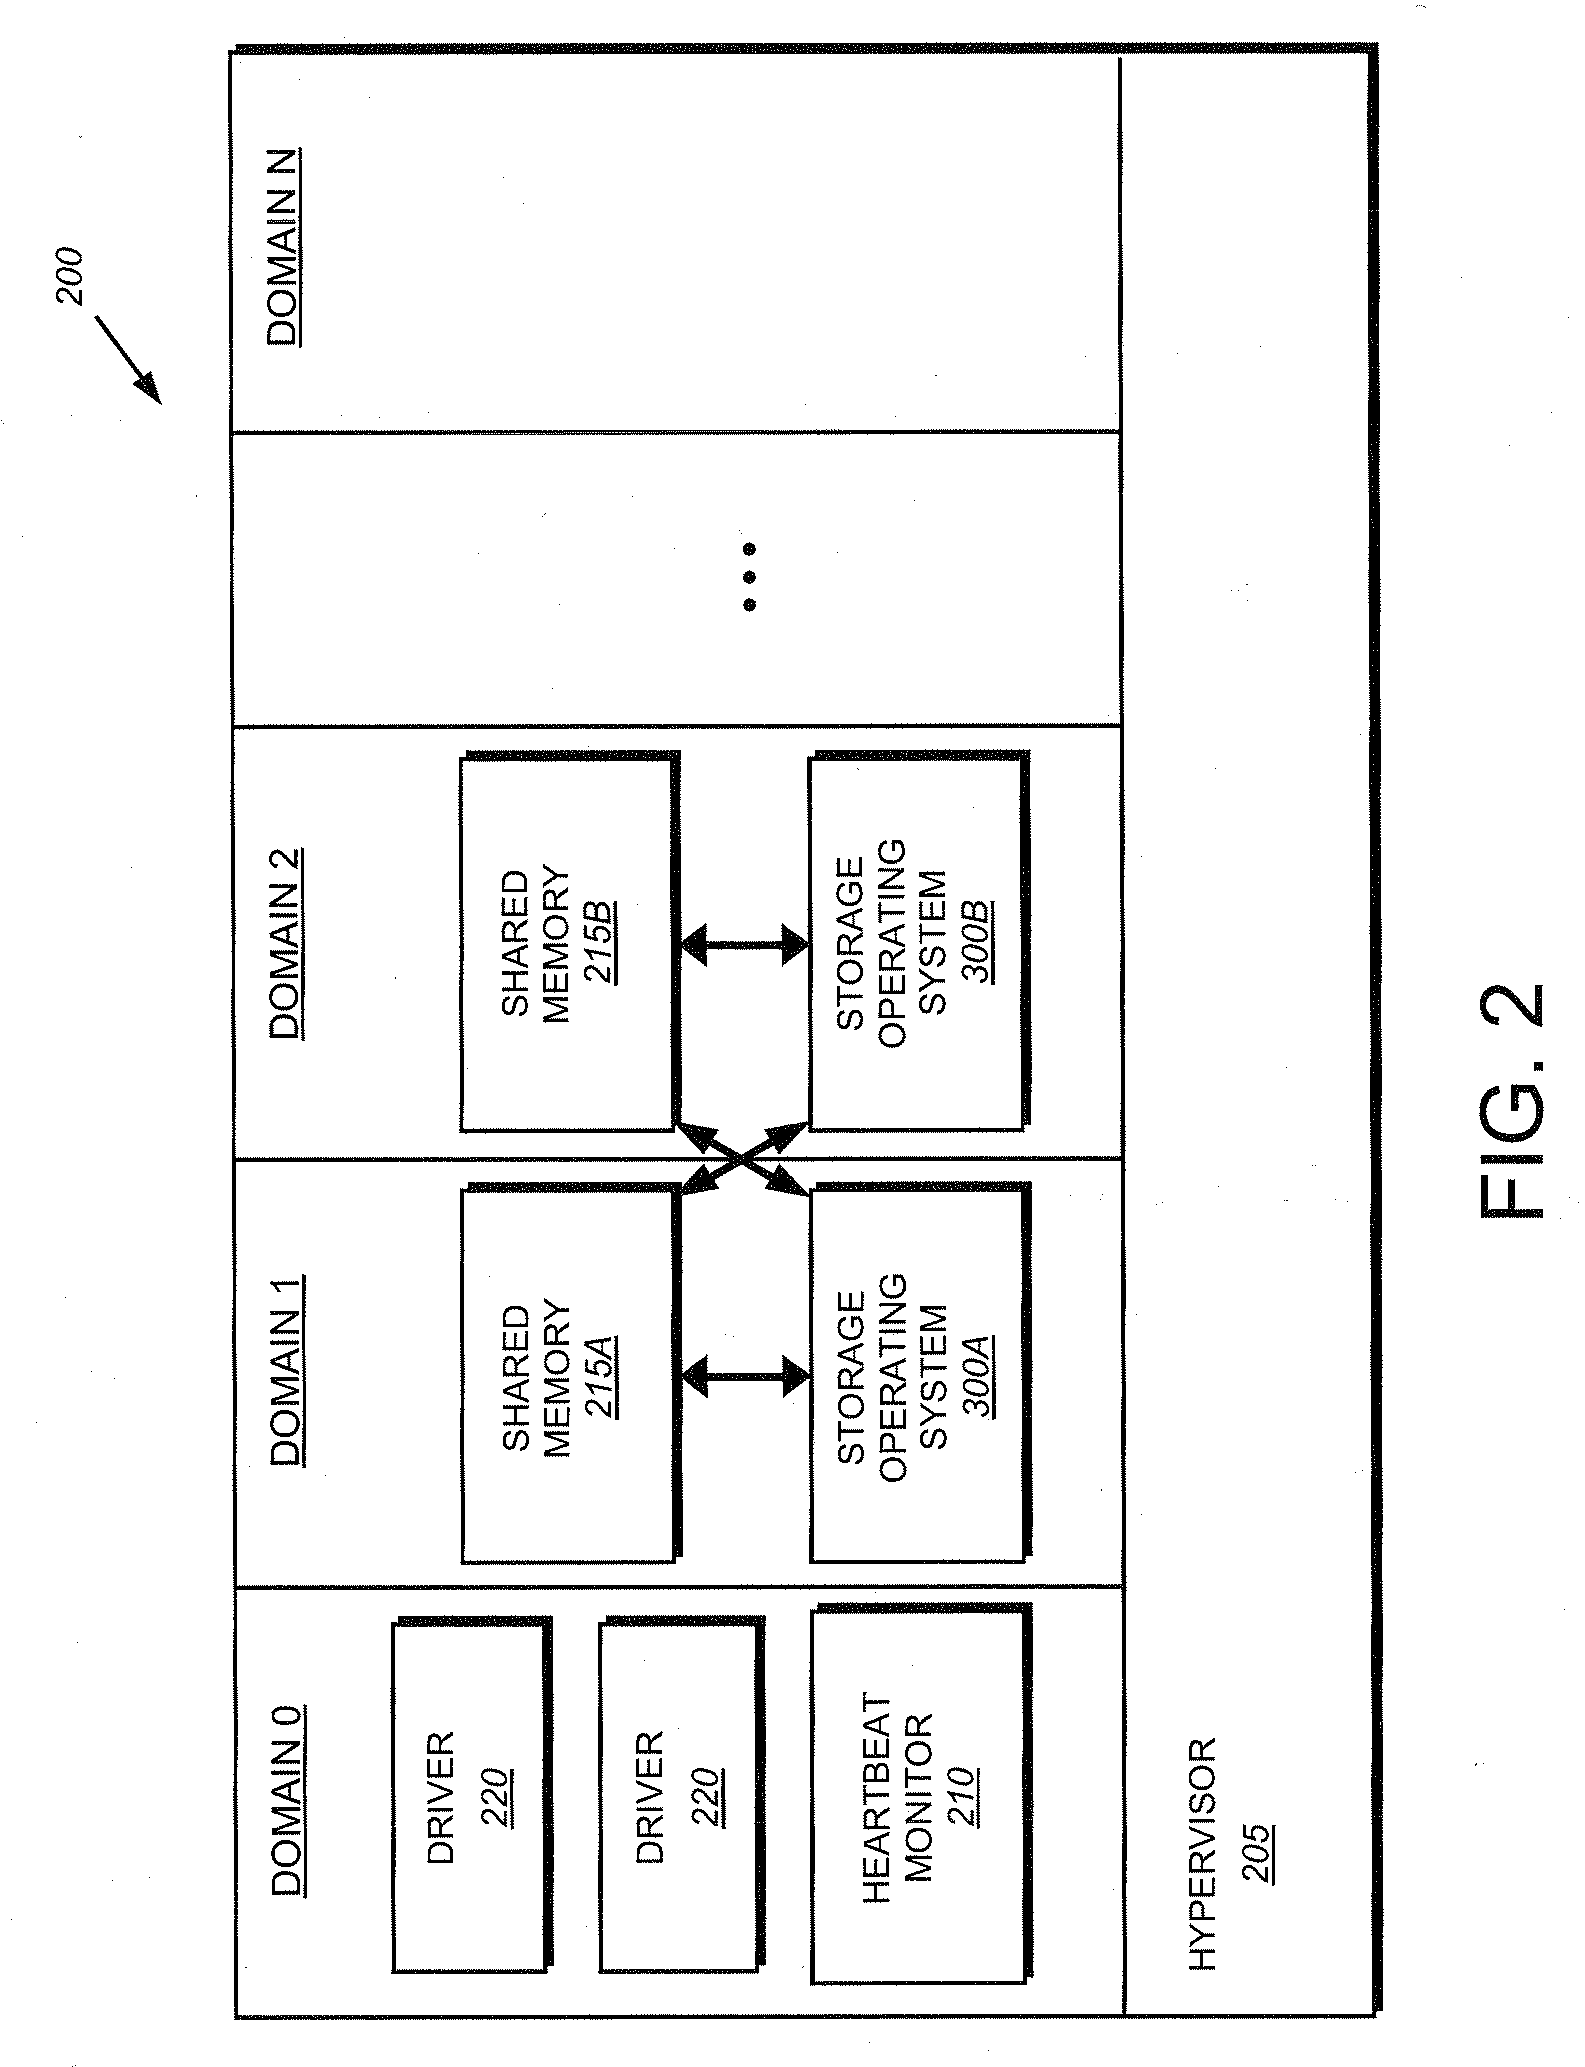 System and method for failover of guest operating systems in a virtual machine environment